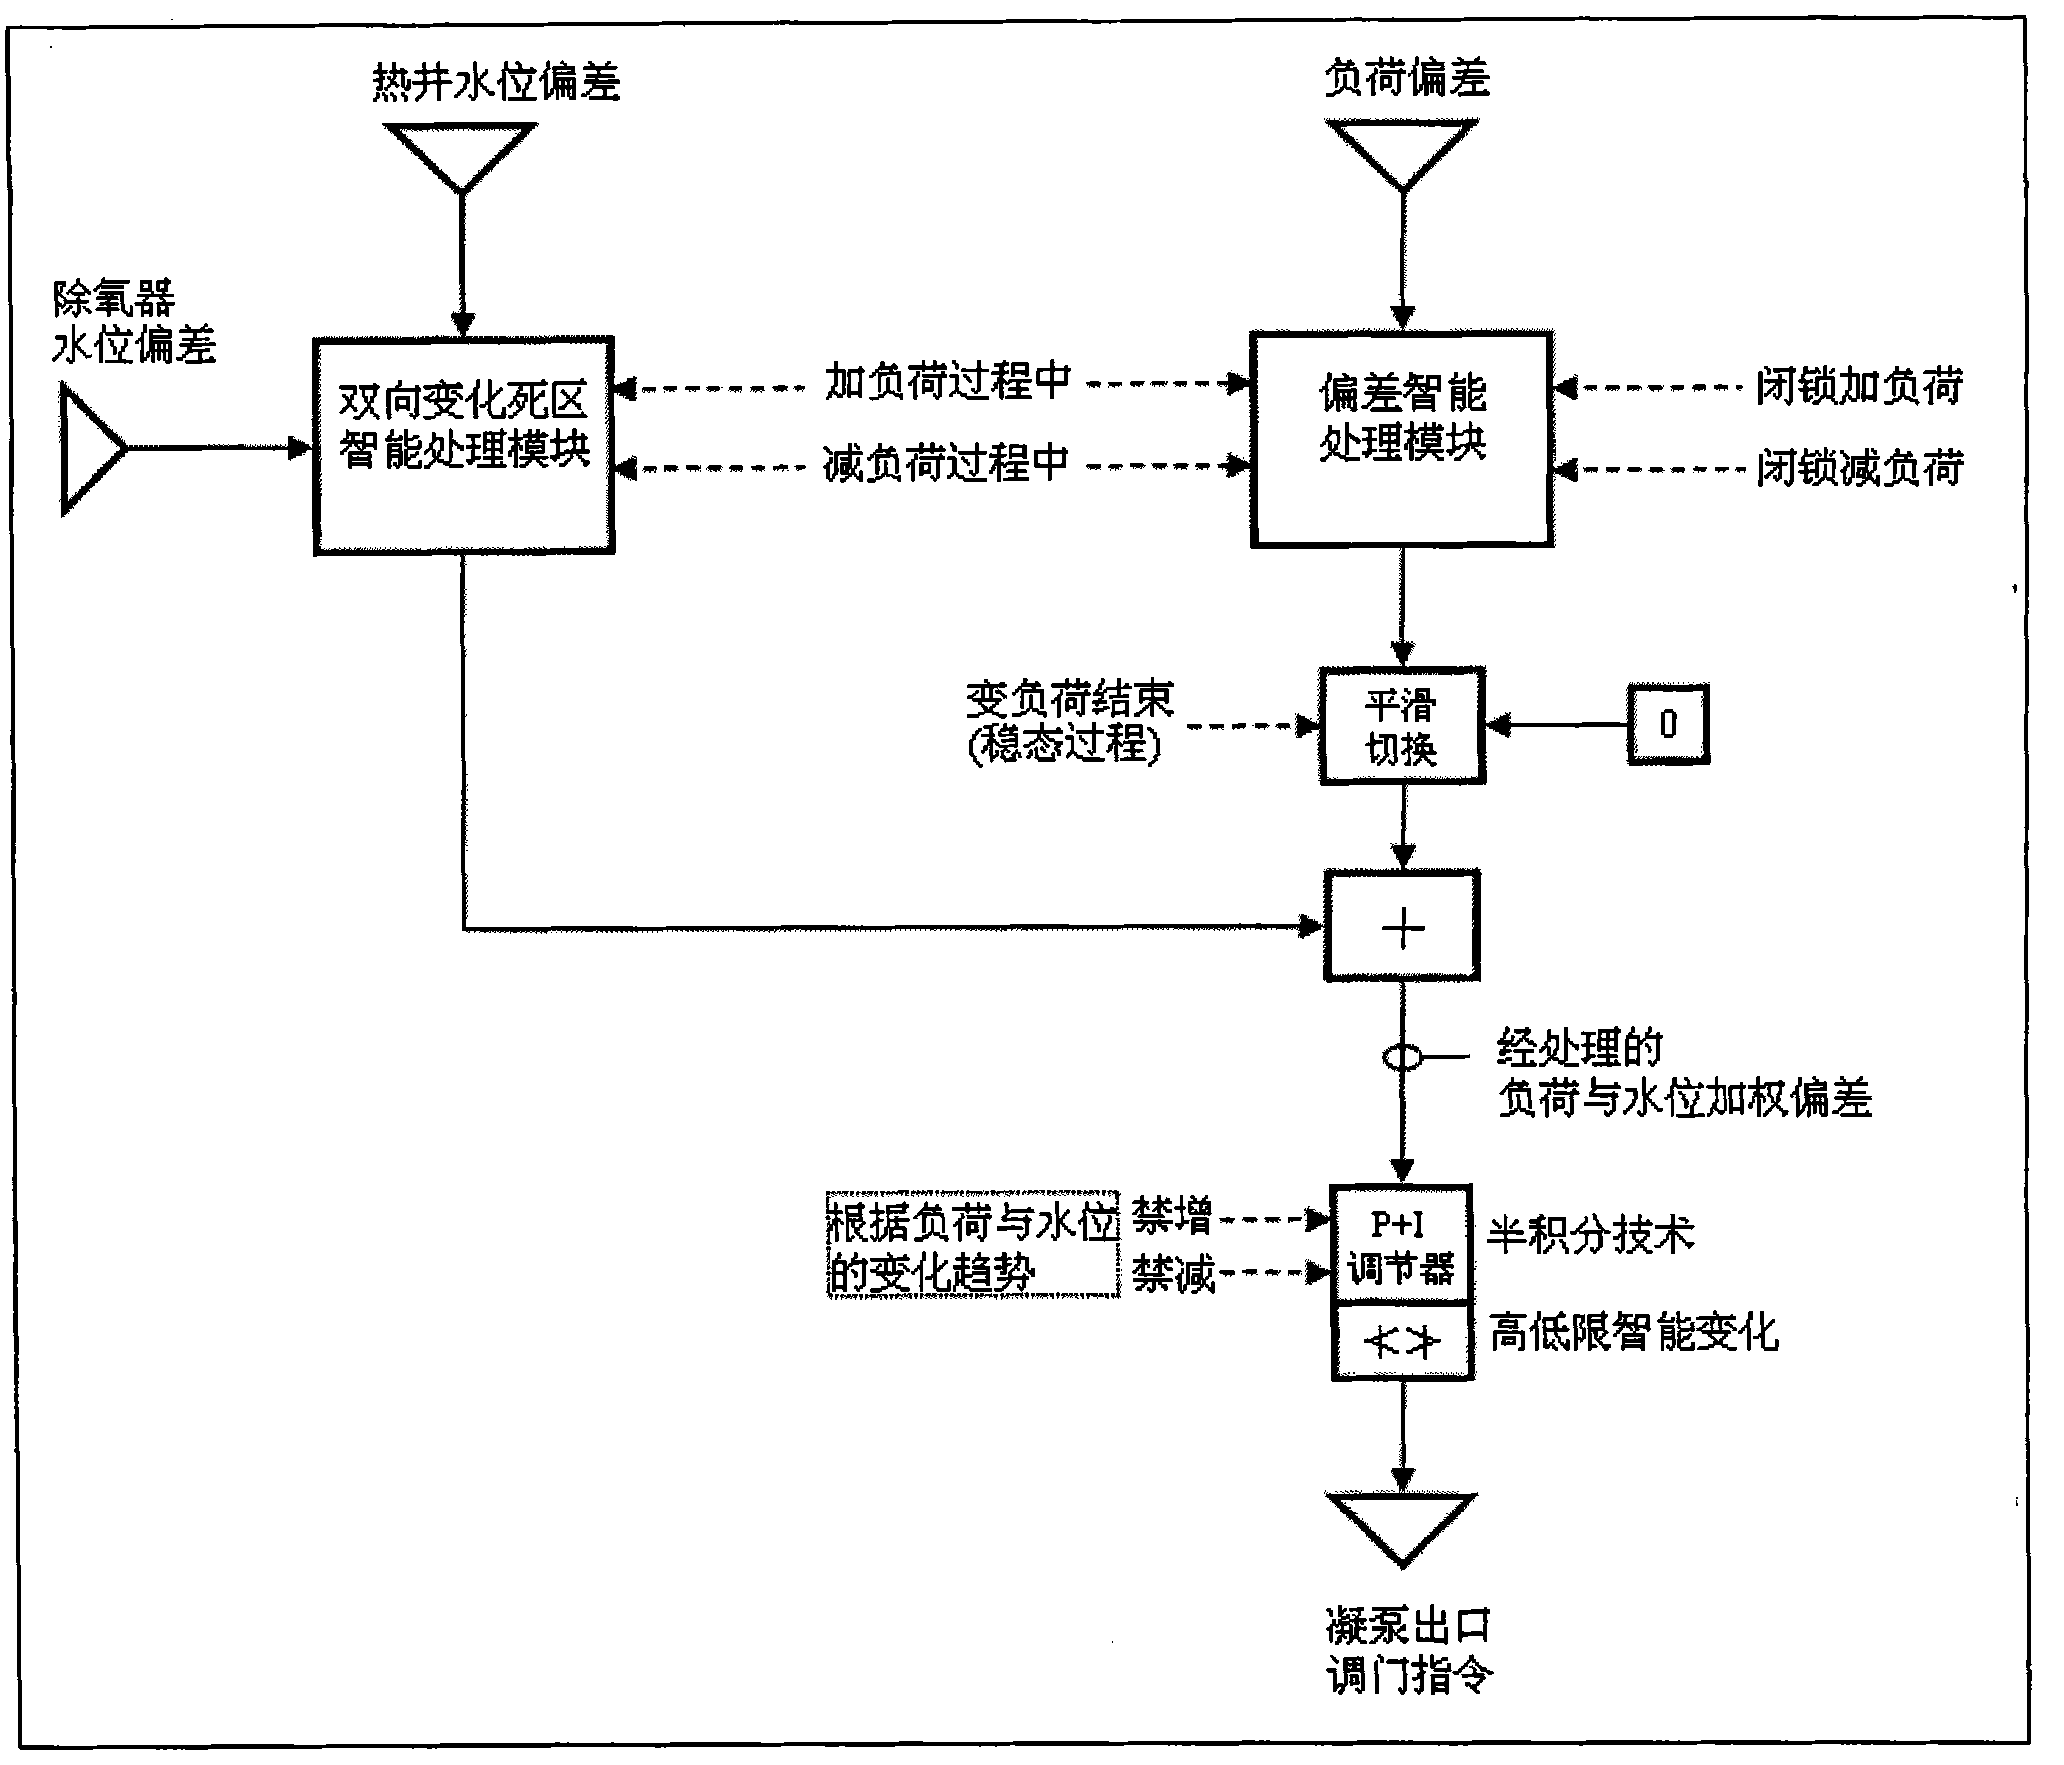 Thermal power unit cooperative load change control method